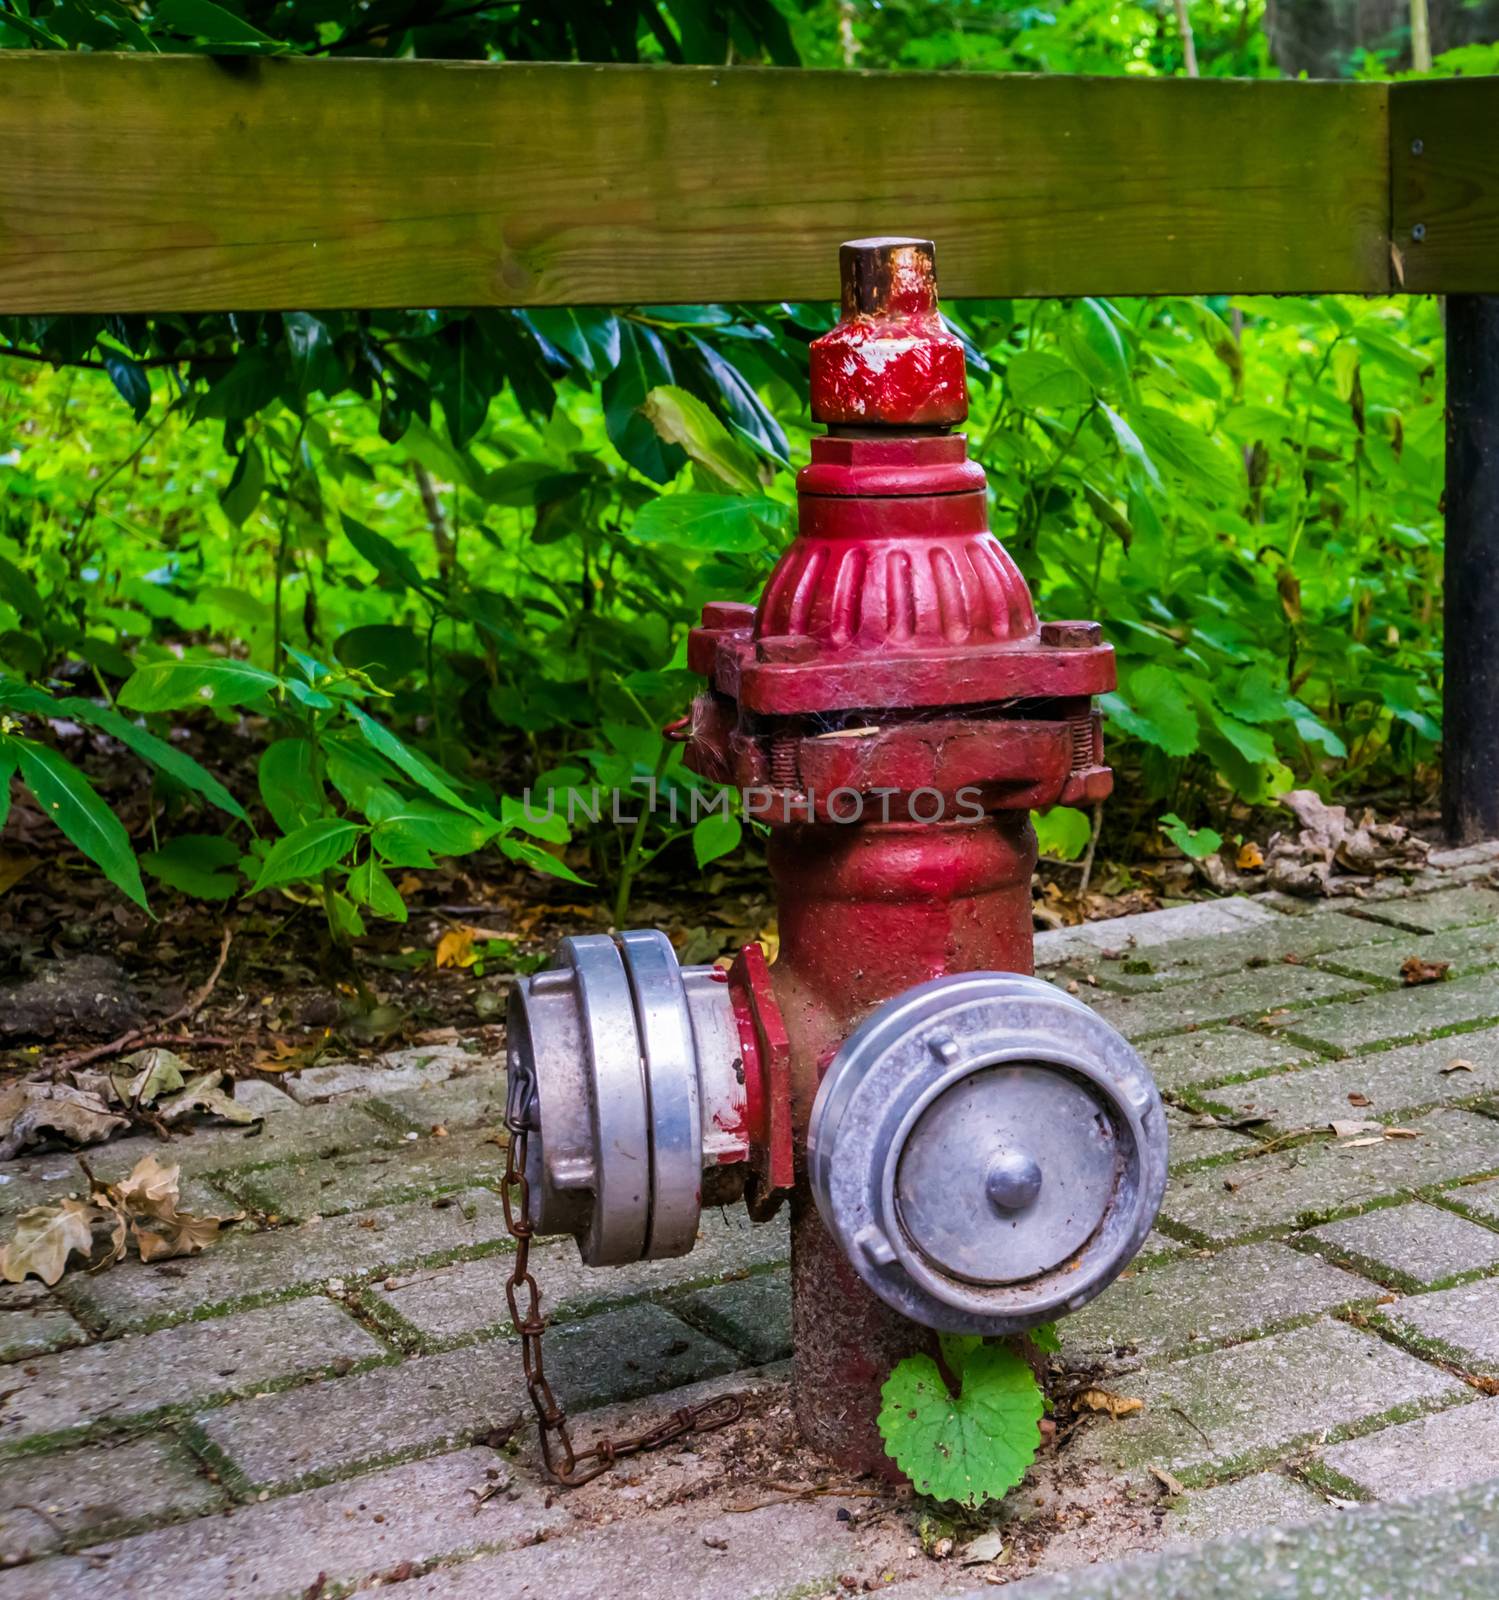 Retro fire prevention system, Red fire hydrant with multiple hose fittings, outdoor safety